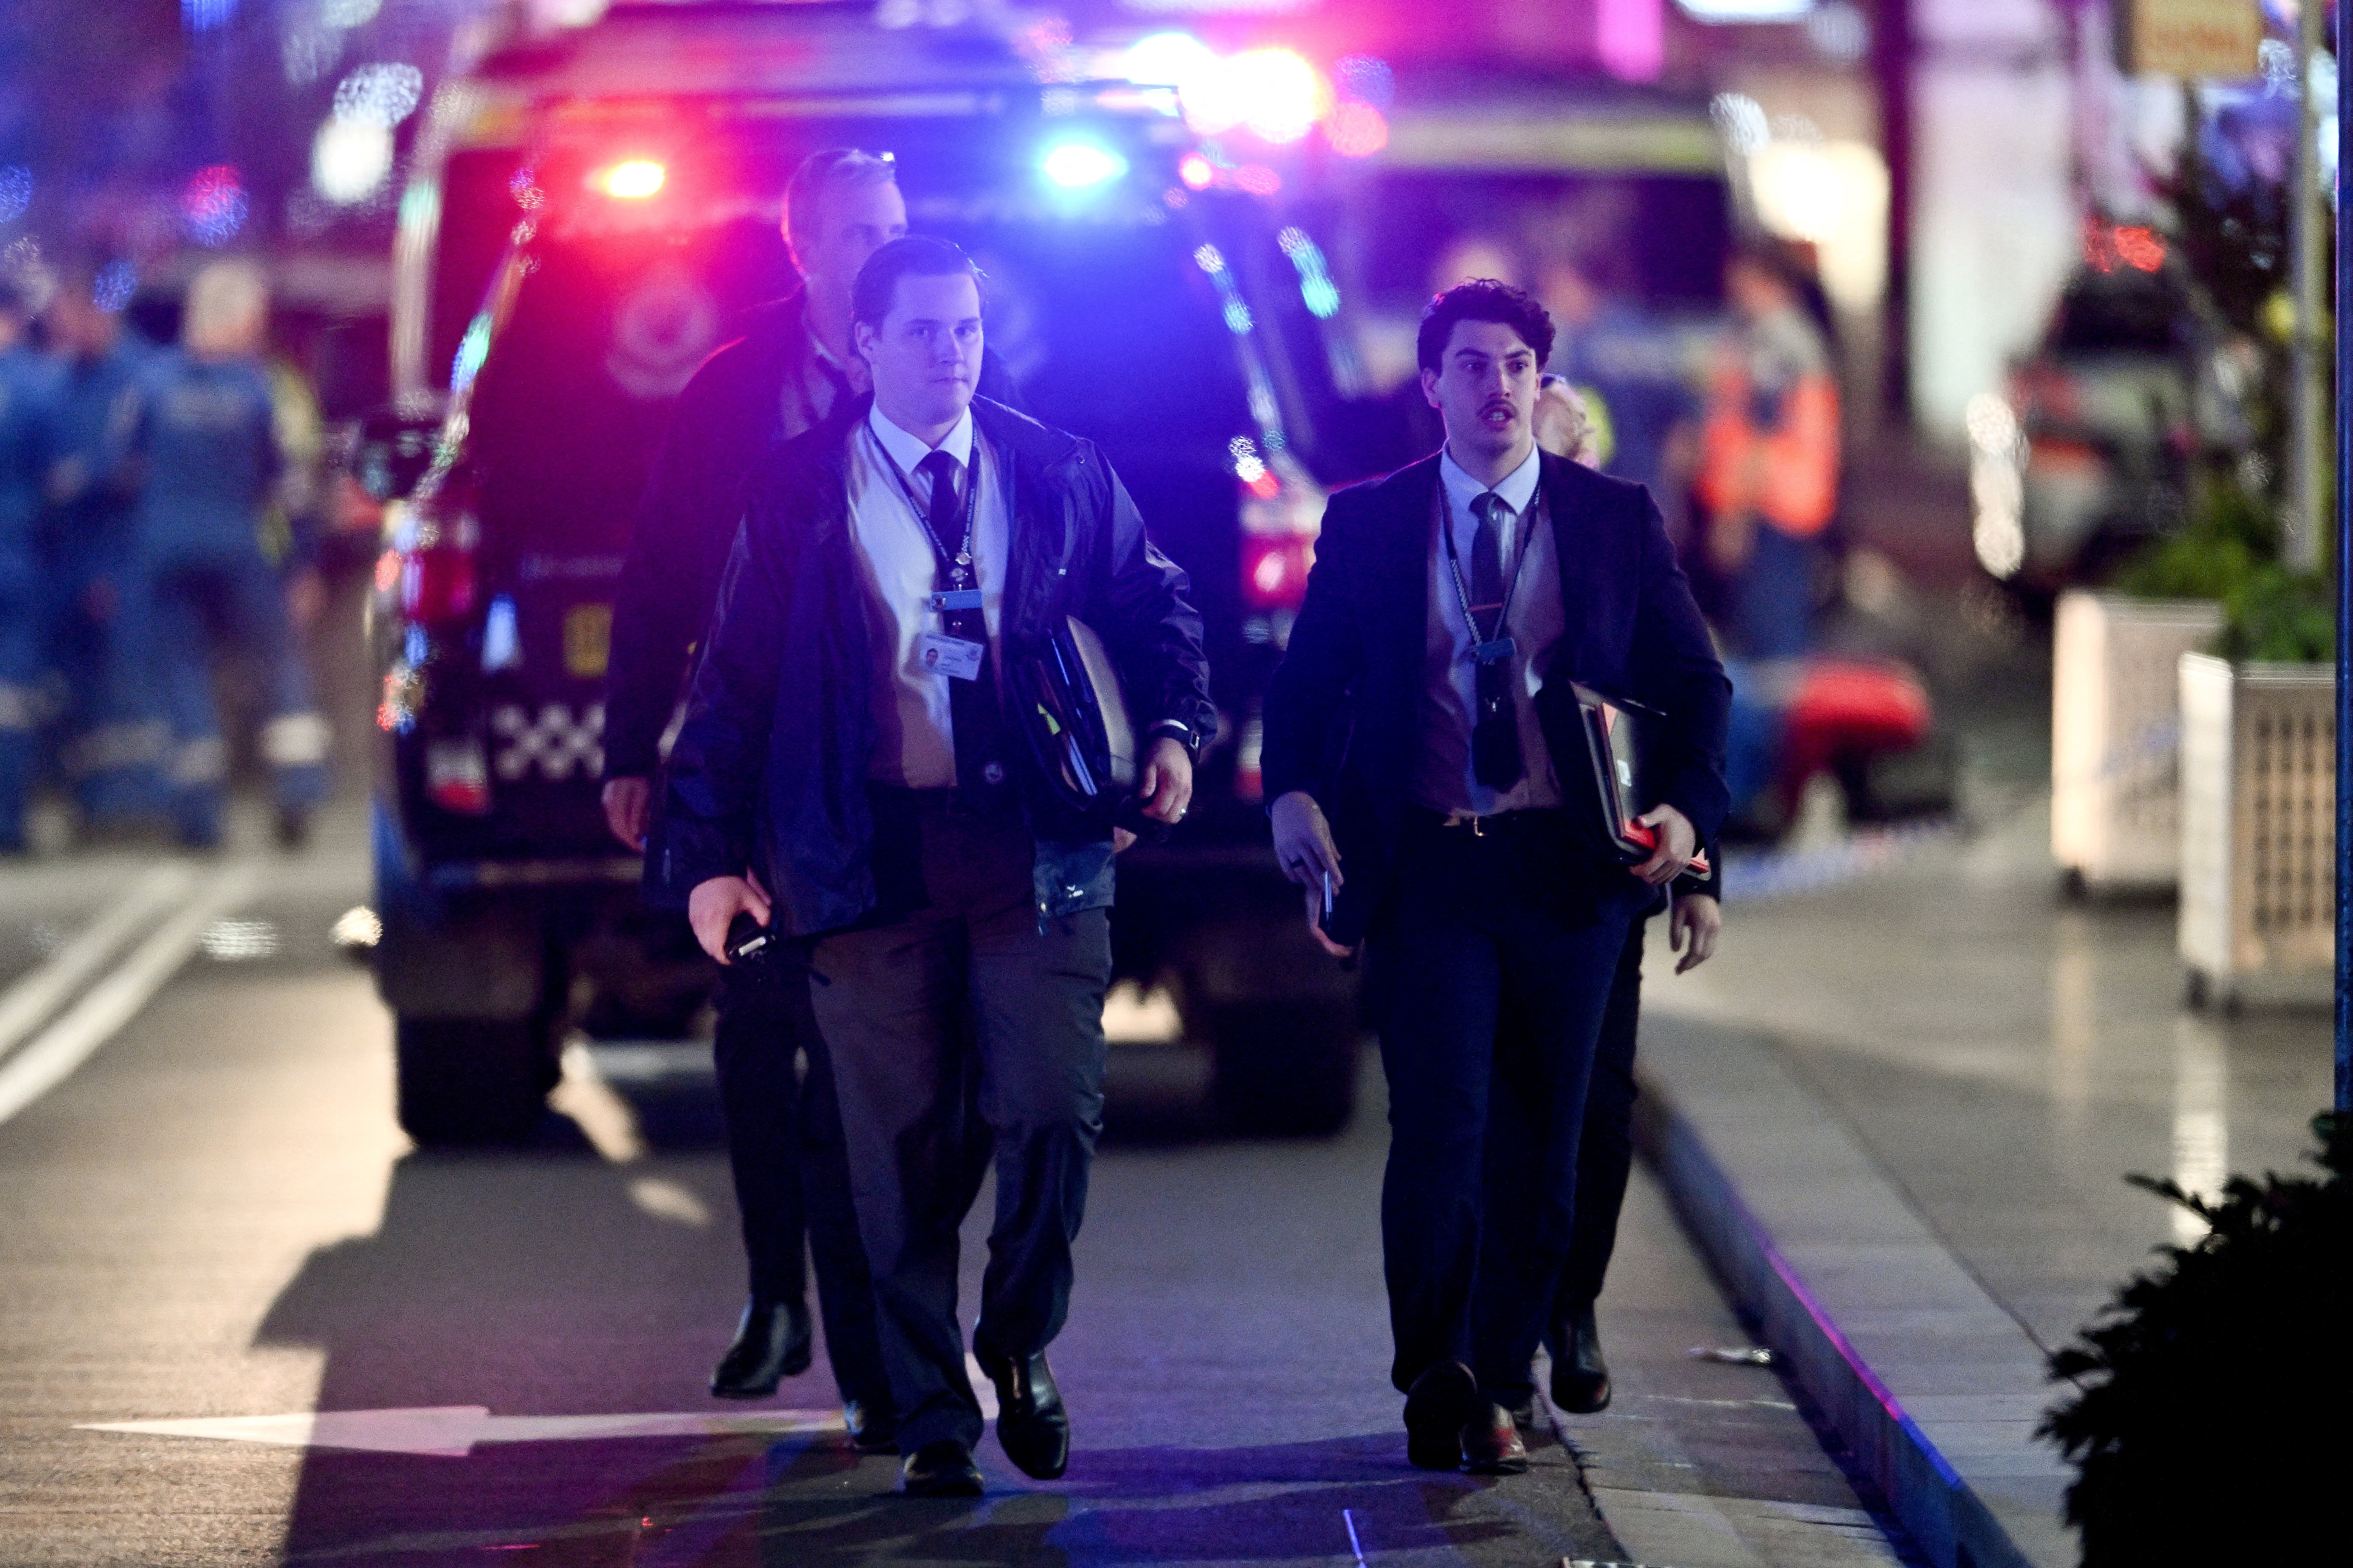 Police and emergency services are seen at Bondi Junction  in Sydney